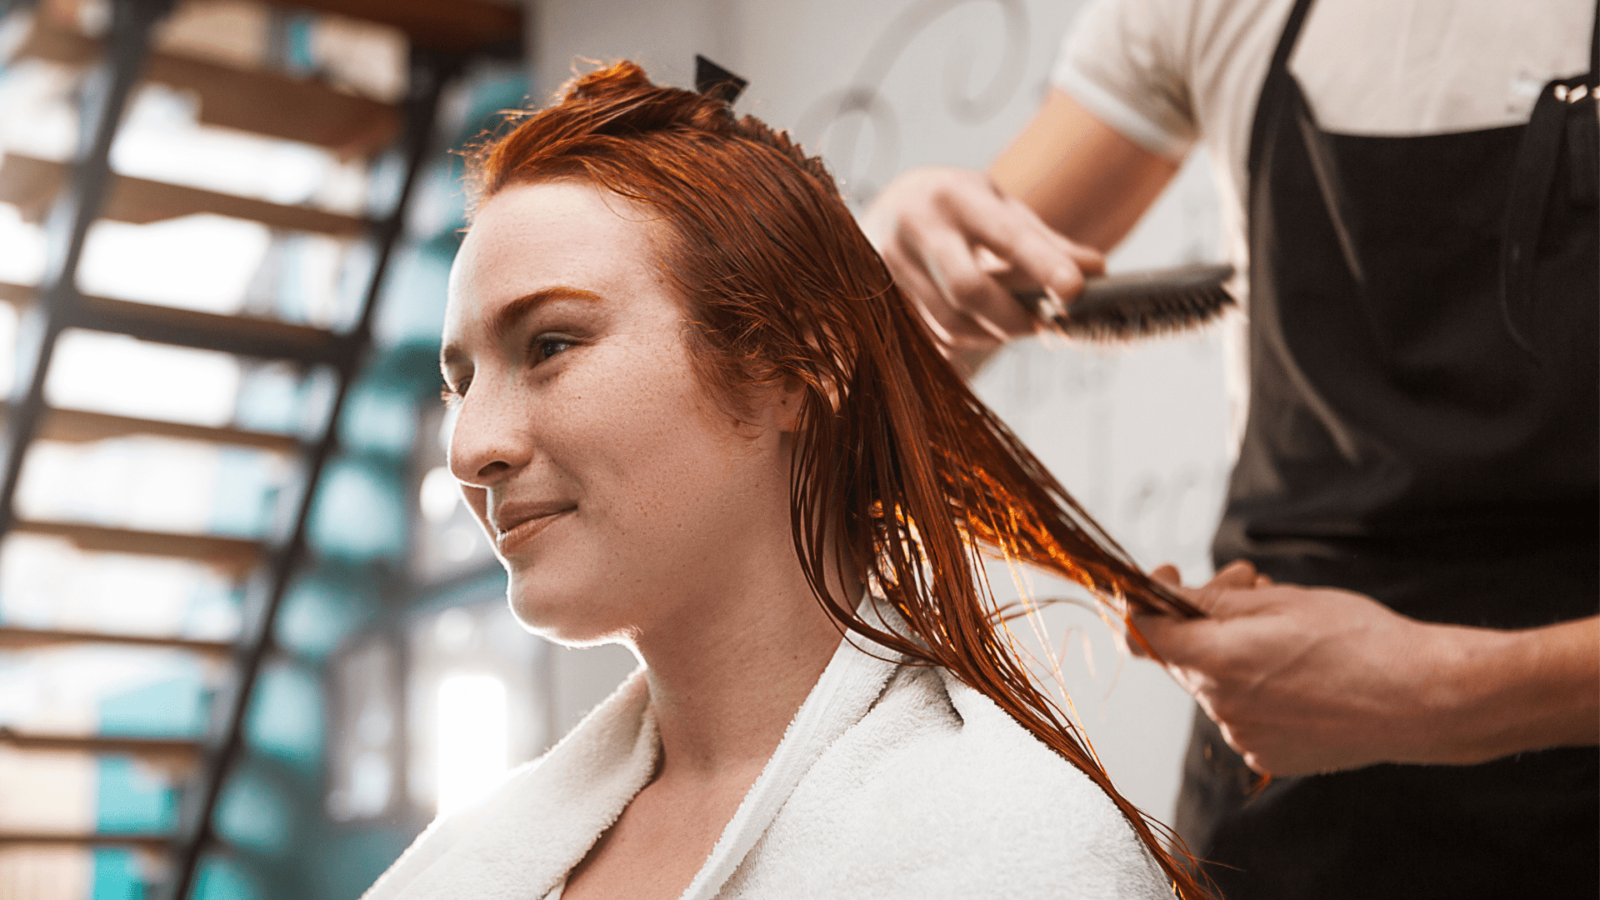 Air-Drying Vs Blow-Drying Hair & Damage – What Is Best for Redheads?